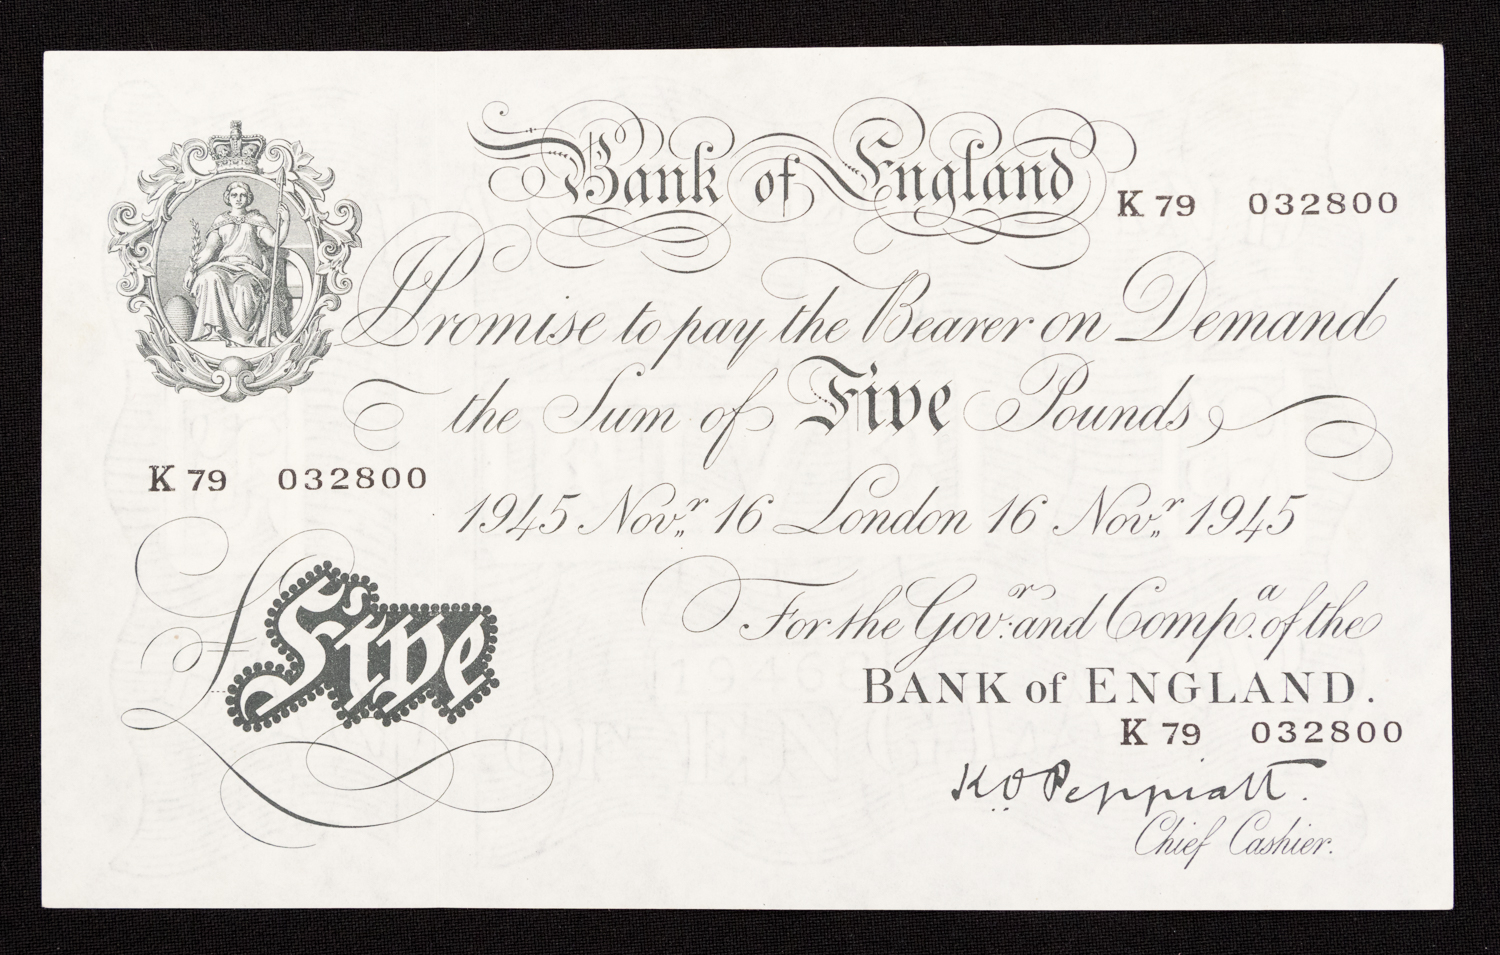 Banknote, Five Pounds Peppiatt dated 16th November 1945 series K79 932800, - Image 2 of 3